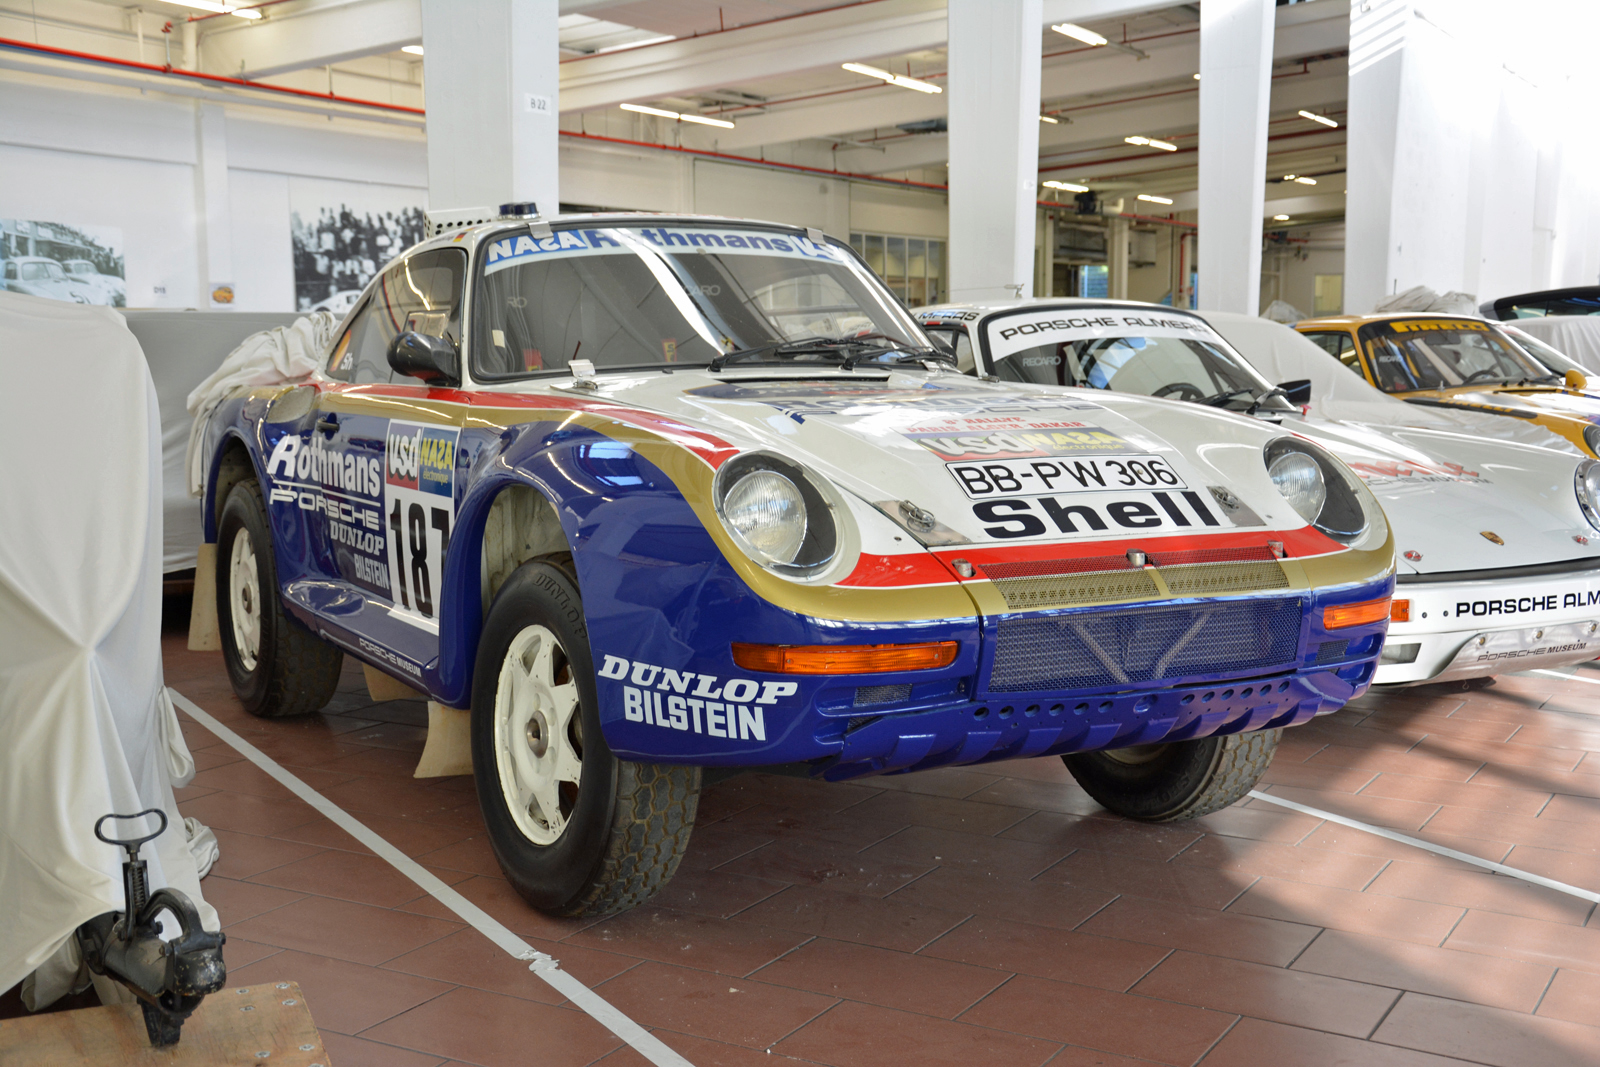 <p>The 959 never raced in a Group B rally event due to the exceptionally high cost of participating in the series. Race car driver <strong>Jacky Ickx</strong> convinced Porsche to put the car on stilts and enter it in the Paris-Dakar, an off-road endurance race that takes a massive toll on both man and machine.</p>